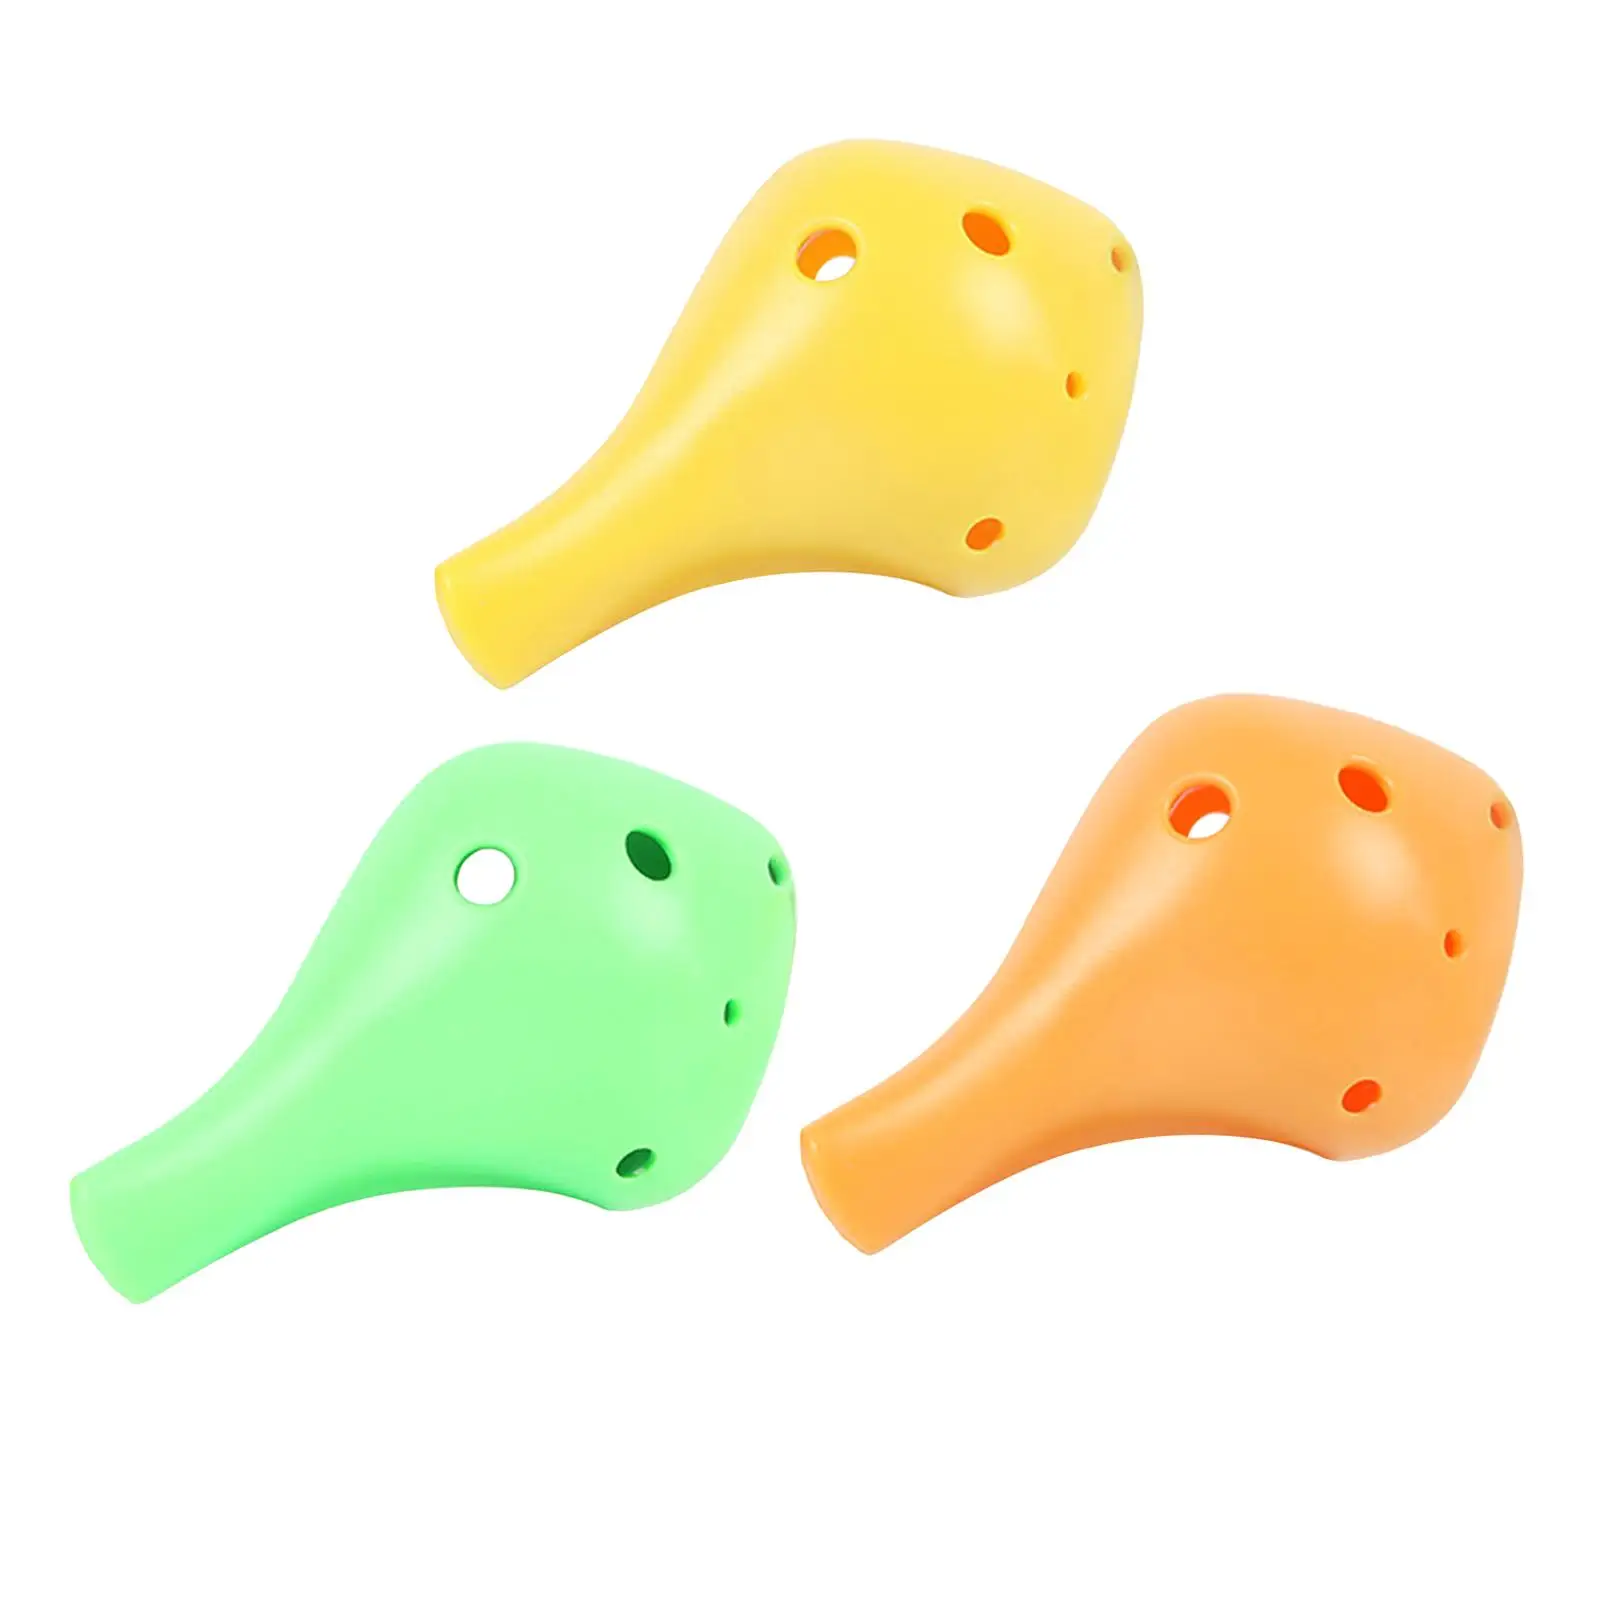 6 Holes Professional Musical Alto Ocarina Early Learning Educational Toy for